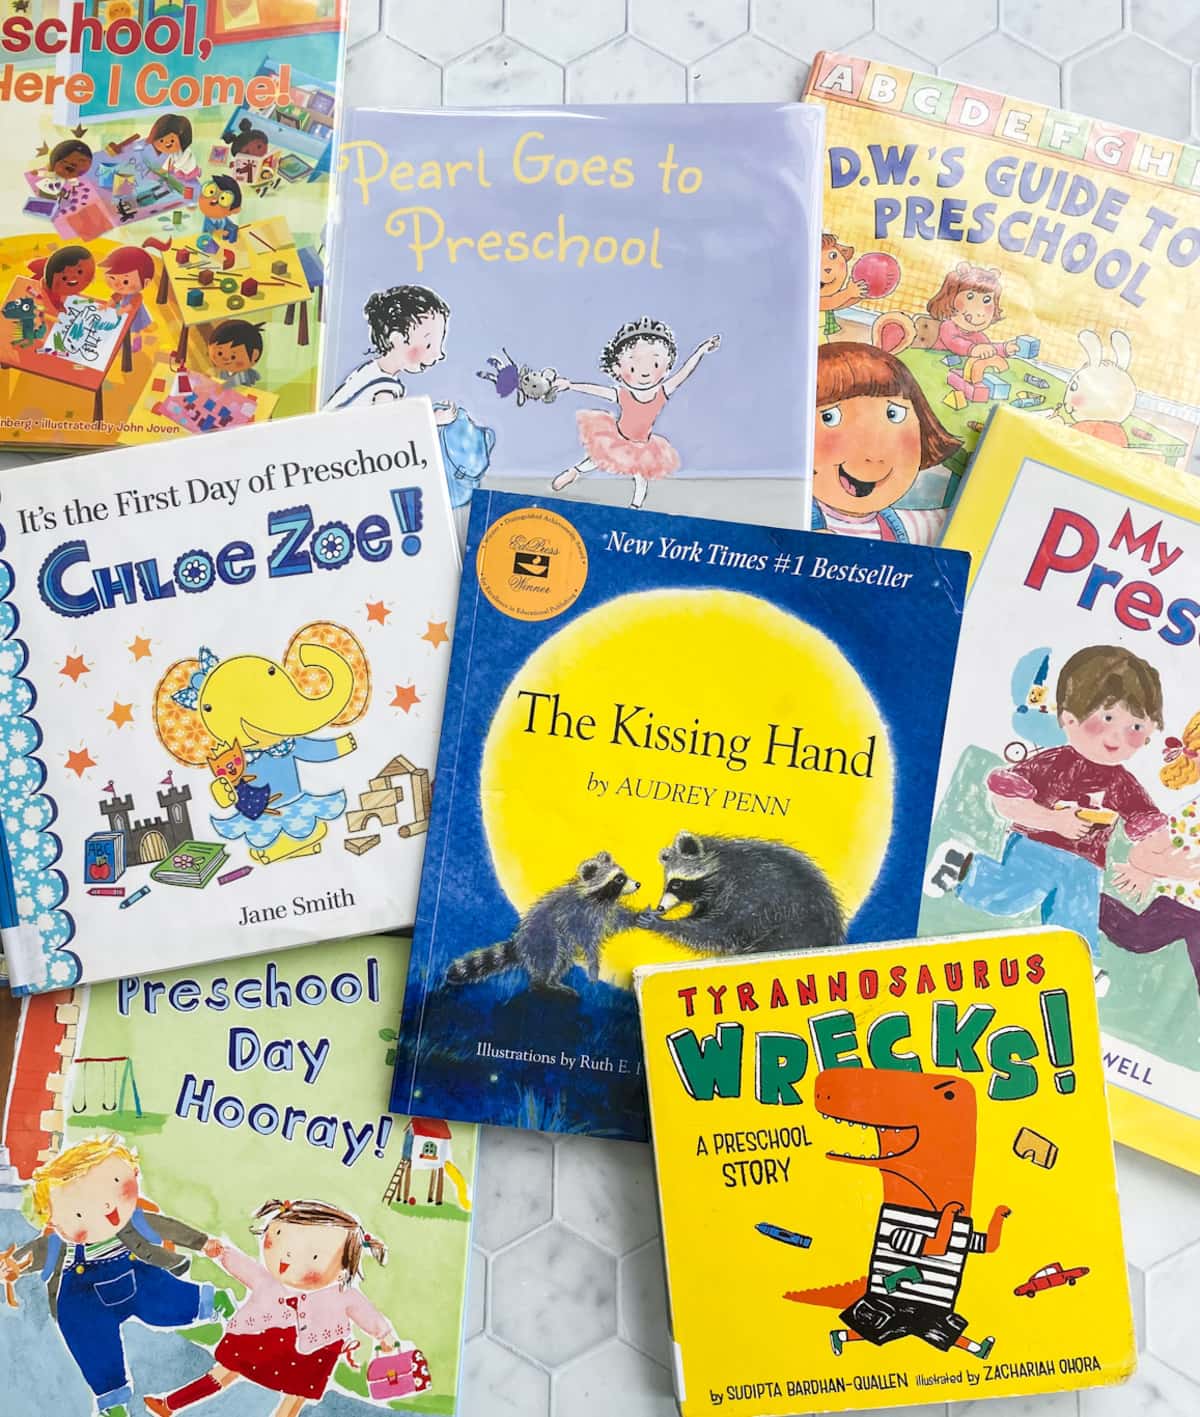 10 Preschool themed books laid out. 